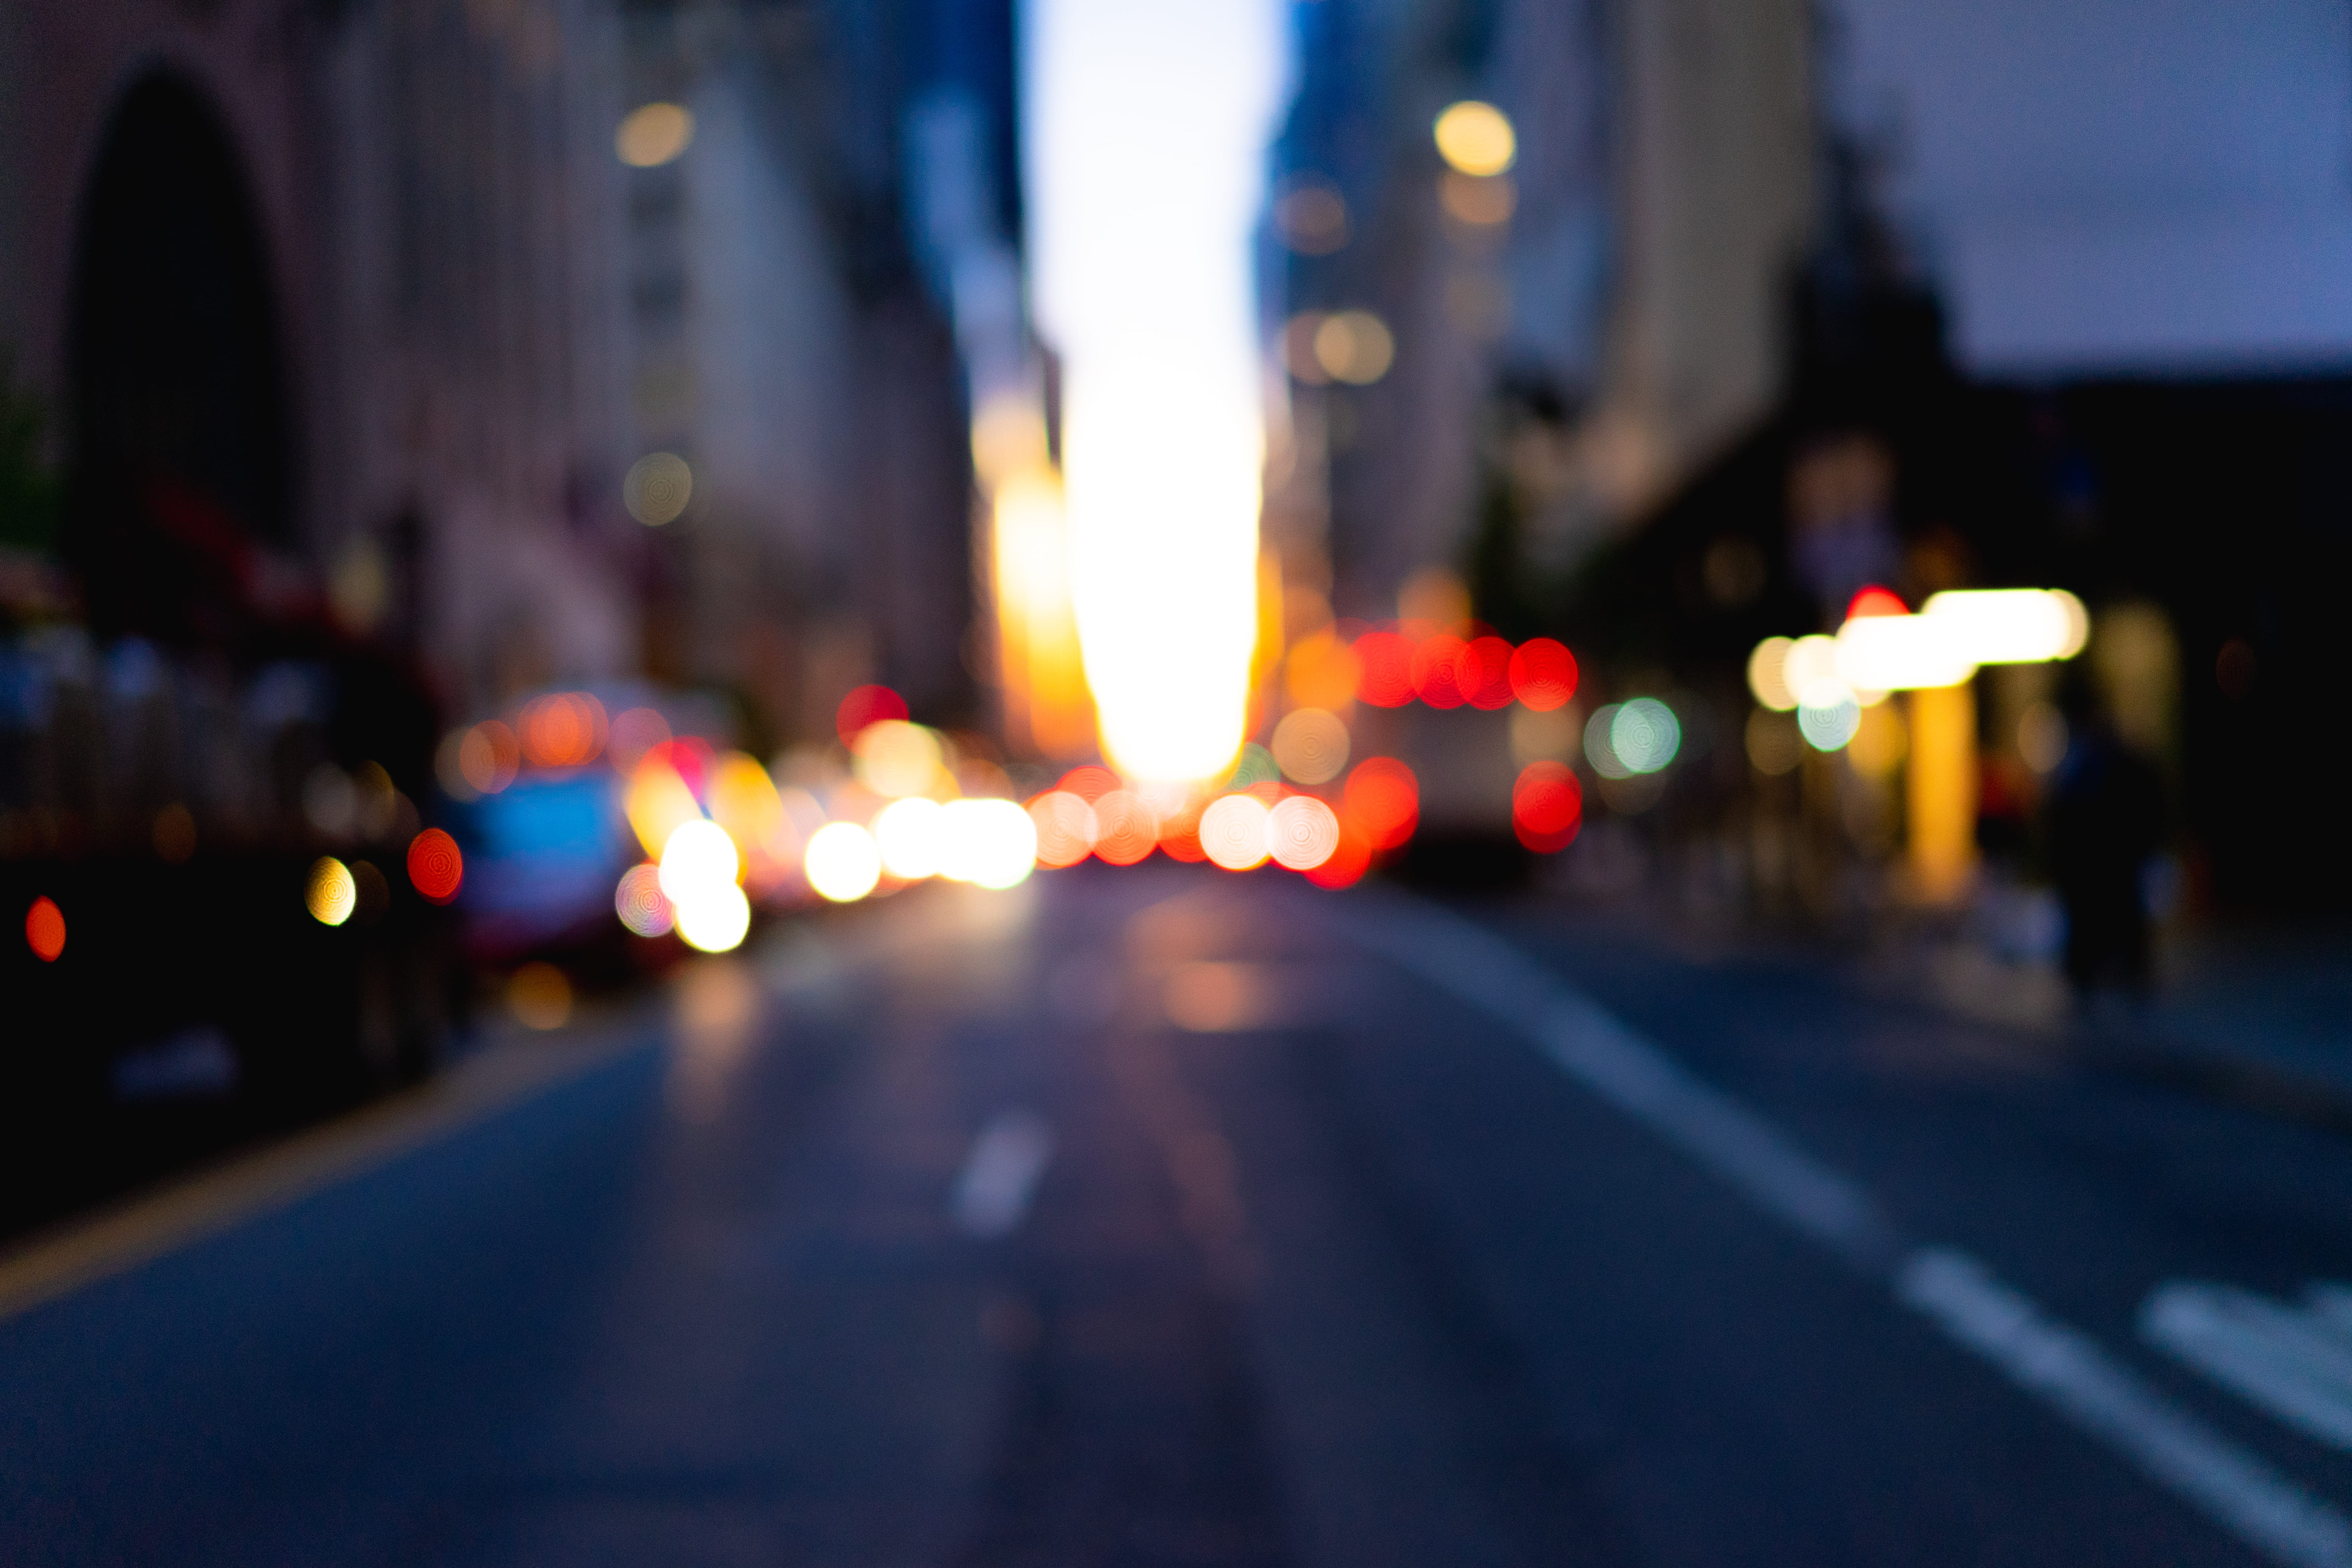 shallow focus photography of road, light, city, blur, bokeh, background